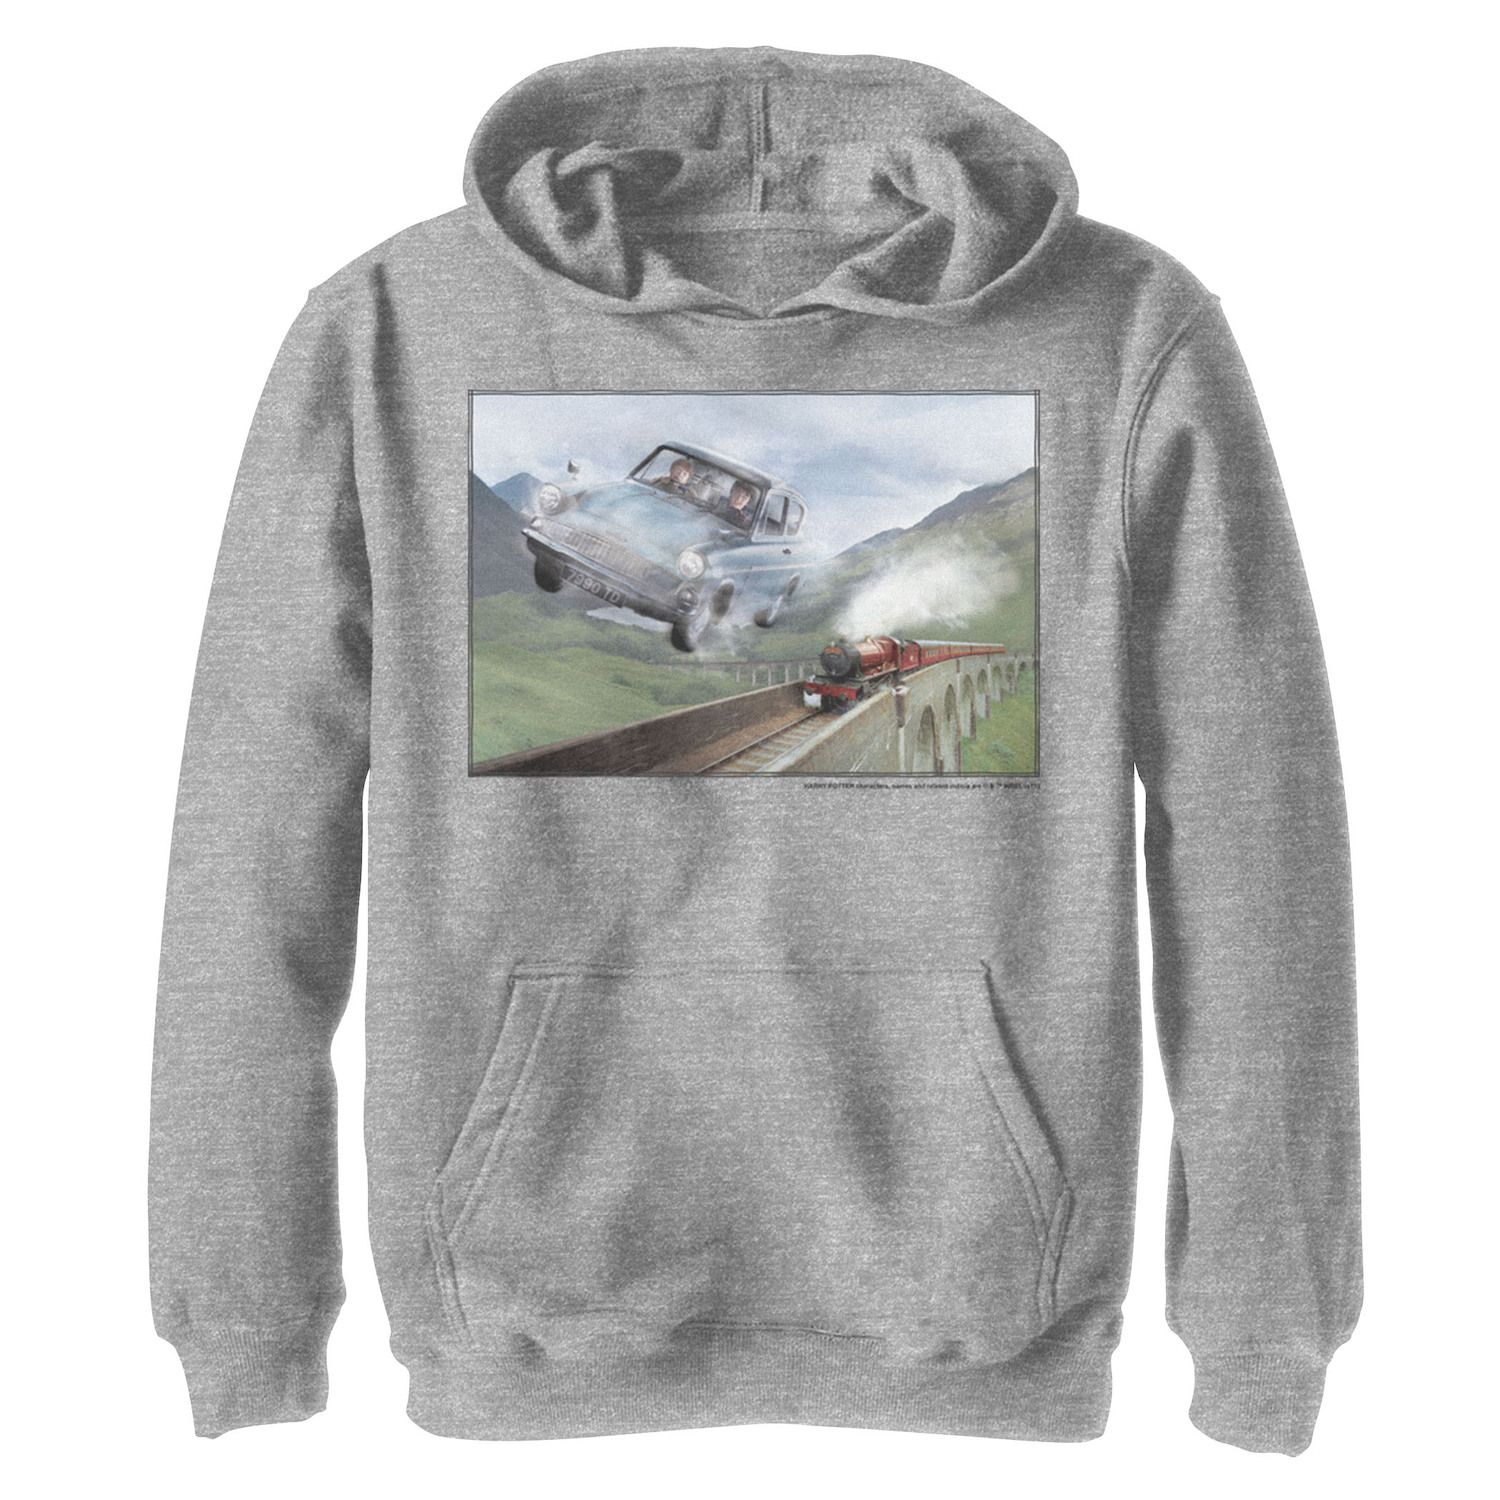 Image for Harry Potter Boys 8-20 Racing The Hogwarts Express Portrait Graphic Fleece Hoodie at Kohl's.